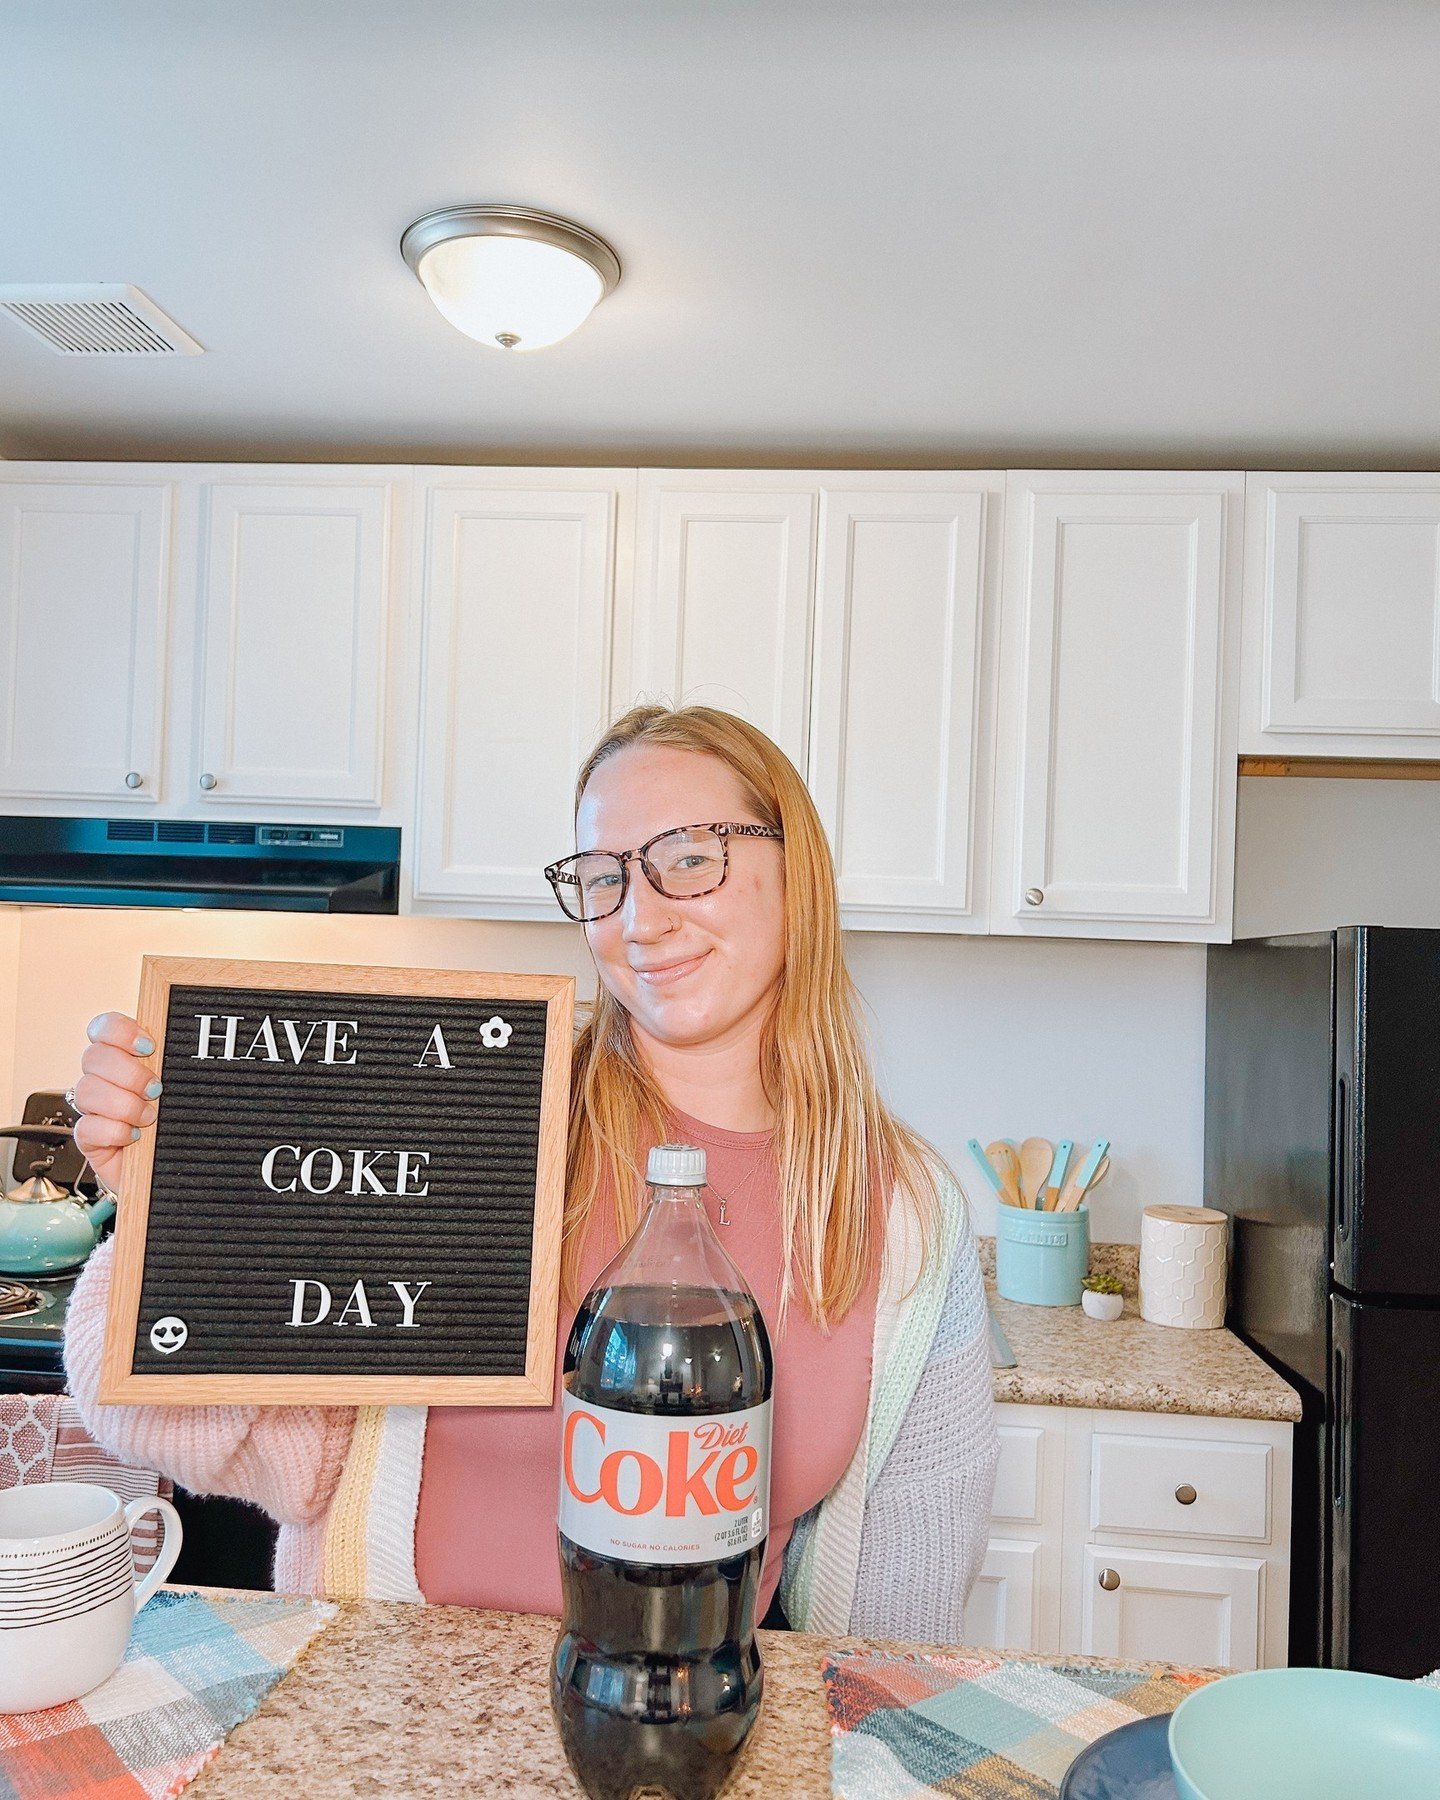 Join us in celebrating National Have a Coke Day by creating your own coke! 🥃

What: Build your own coke with different syrups
When: tomorrow (April 8th) from 1-4pm
Where: RLC